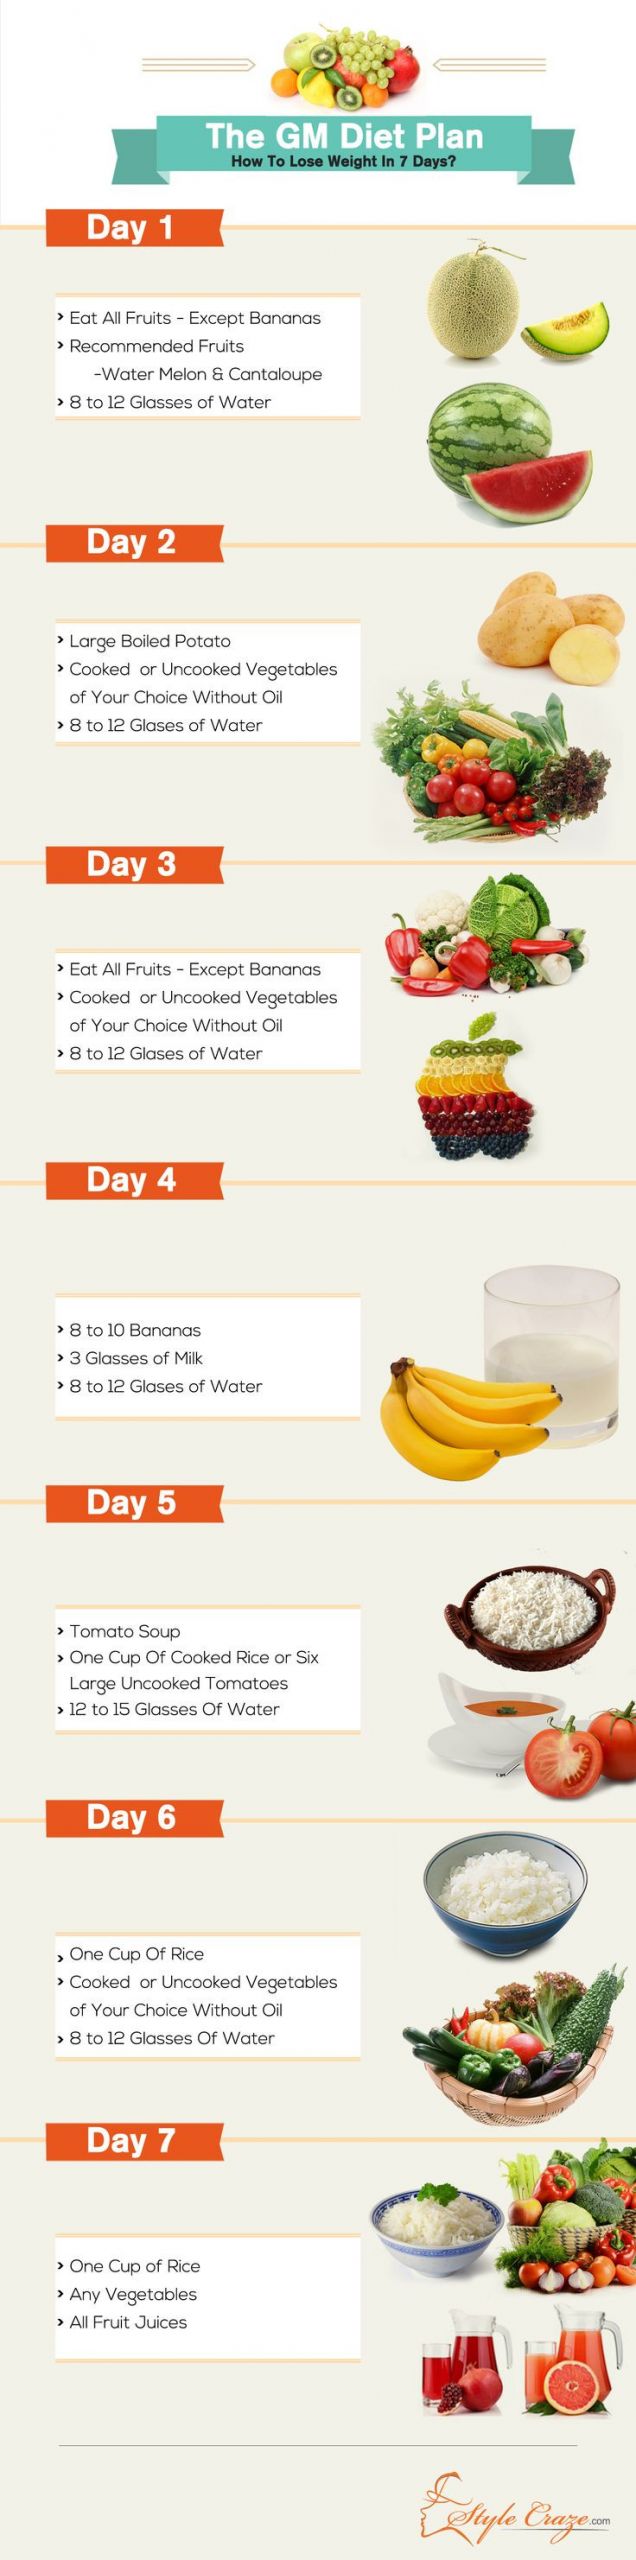 How To Lose Weight Quickly Diet Plans
 7 t plan to lose weight fast Fotolip